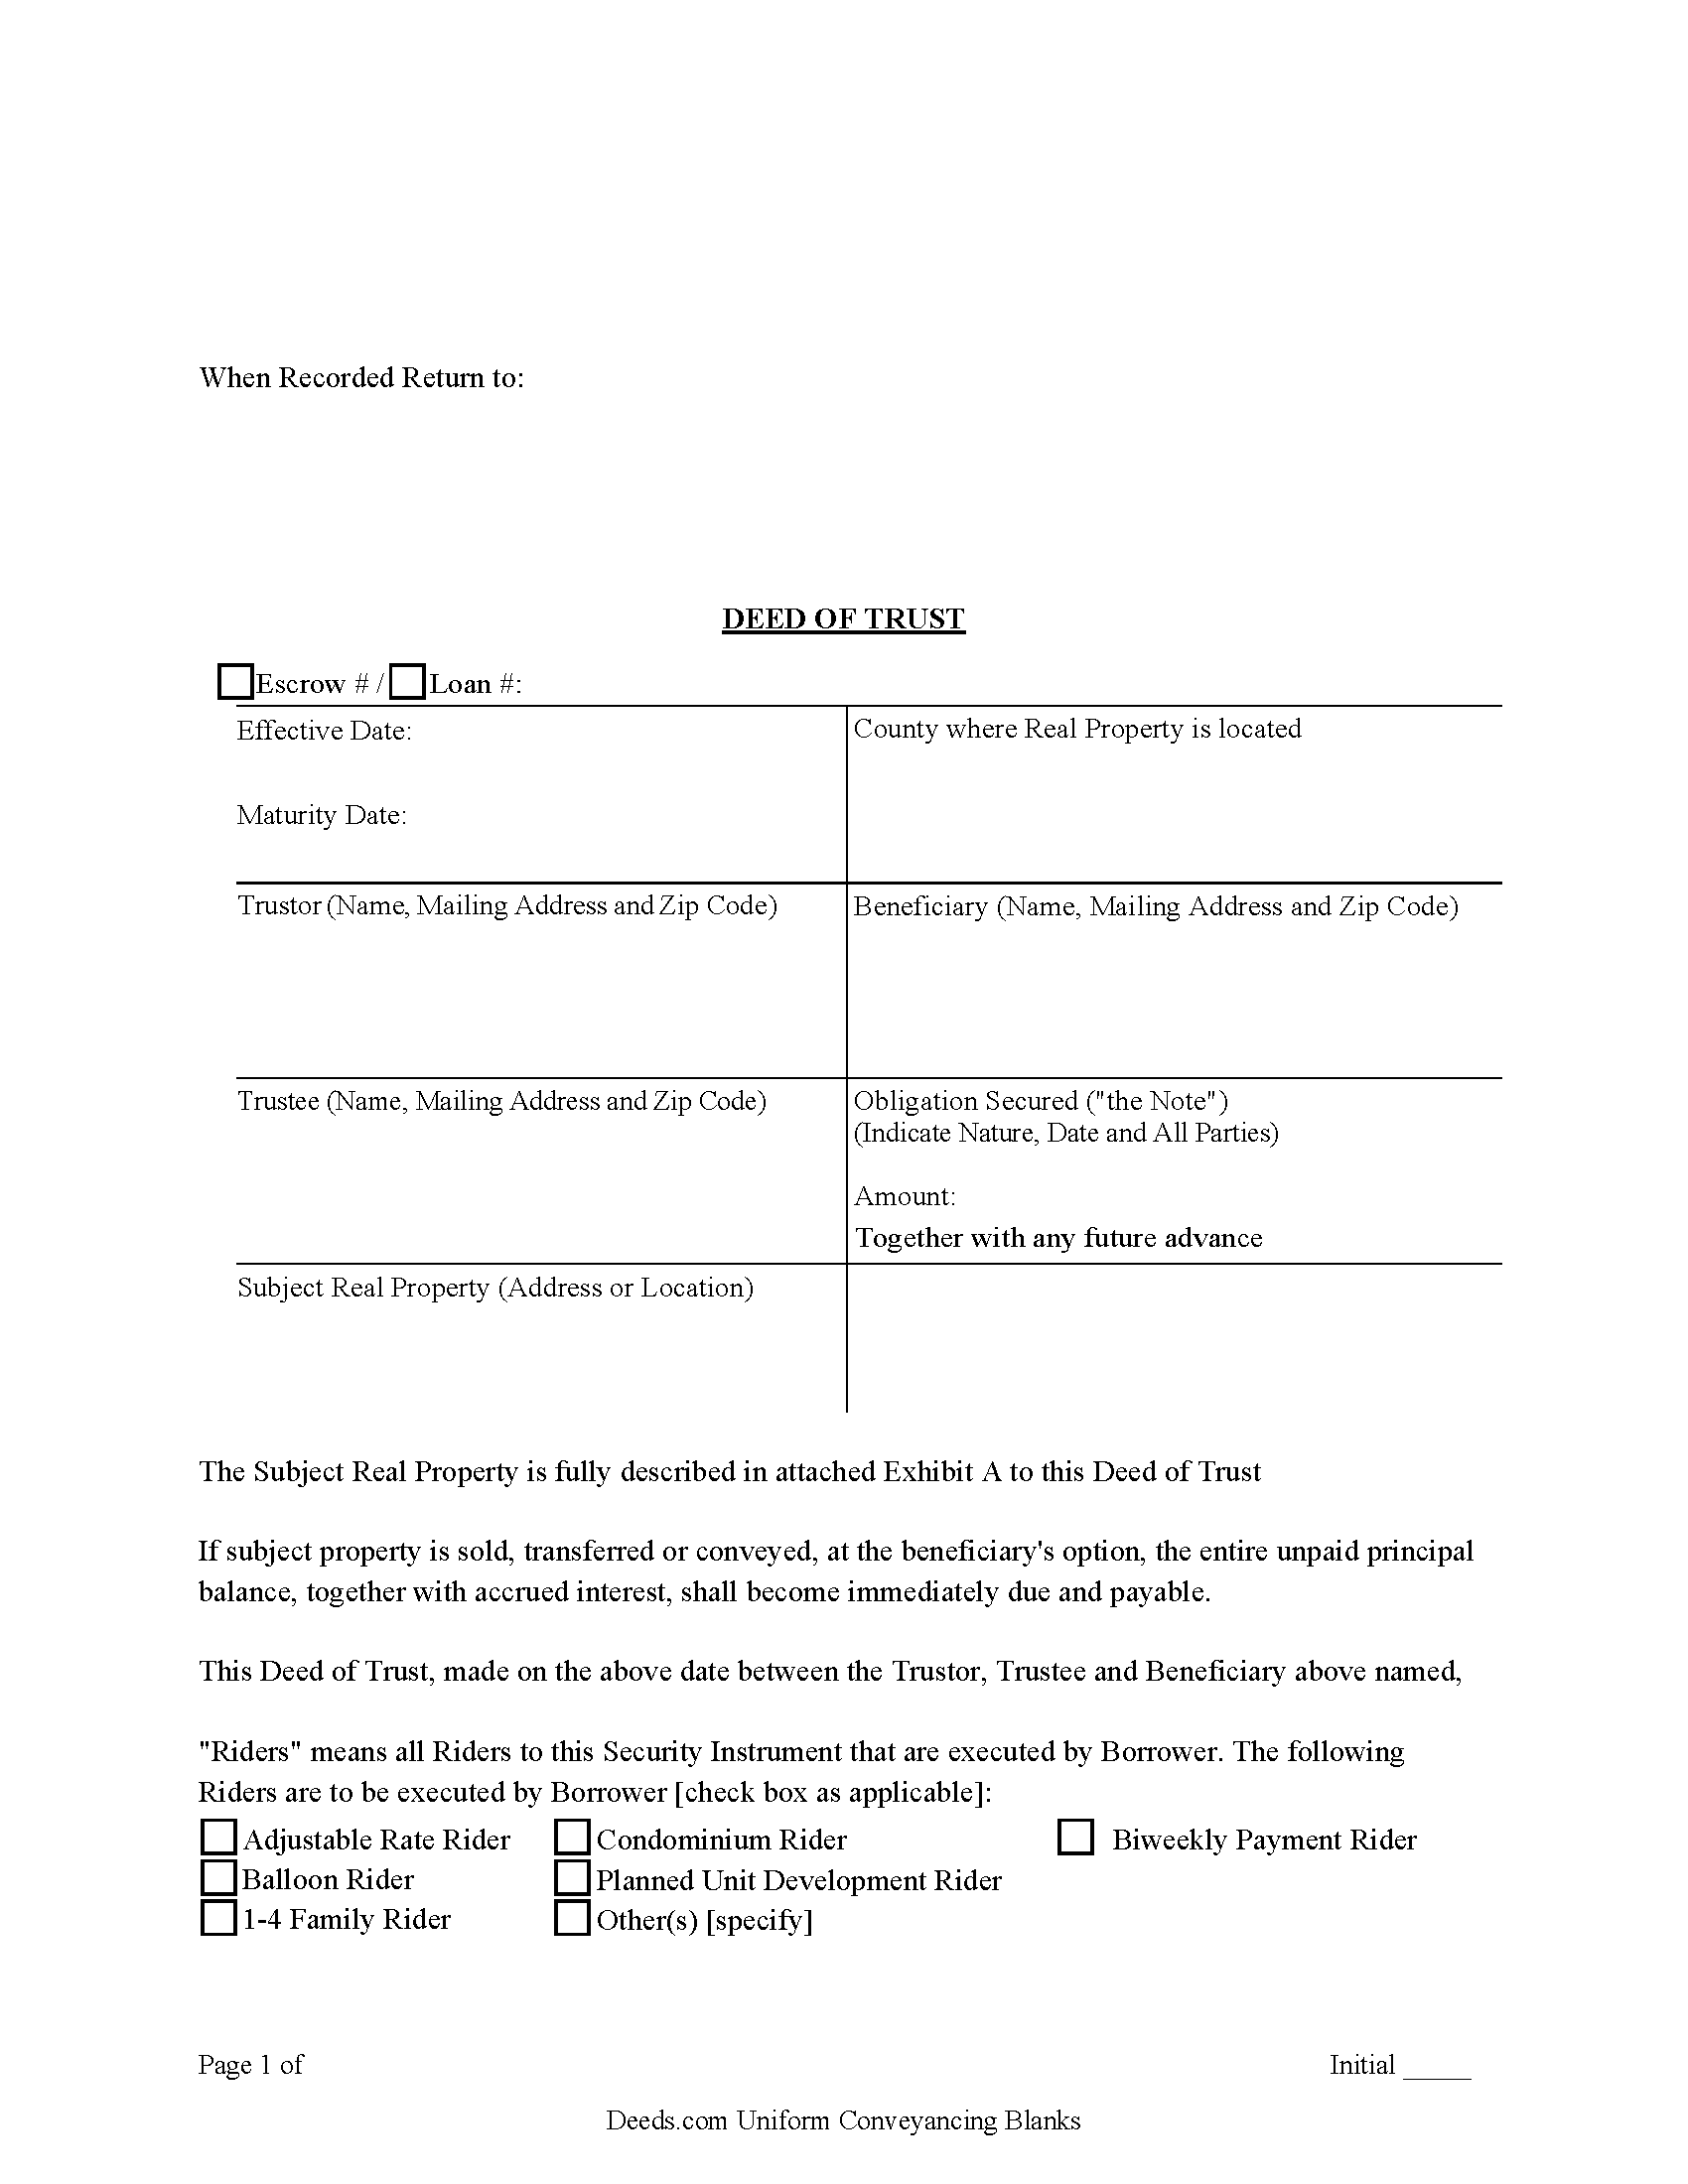 Deed of Trust Form